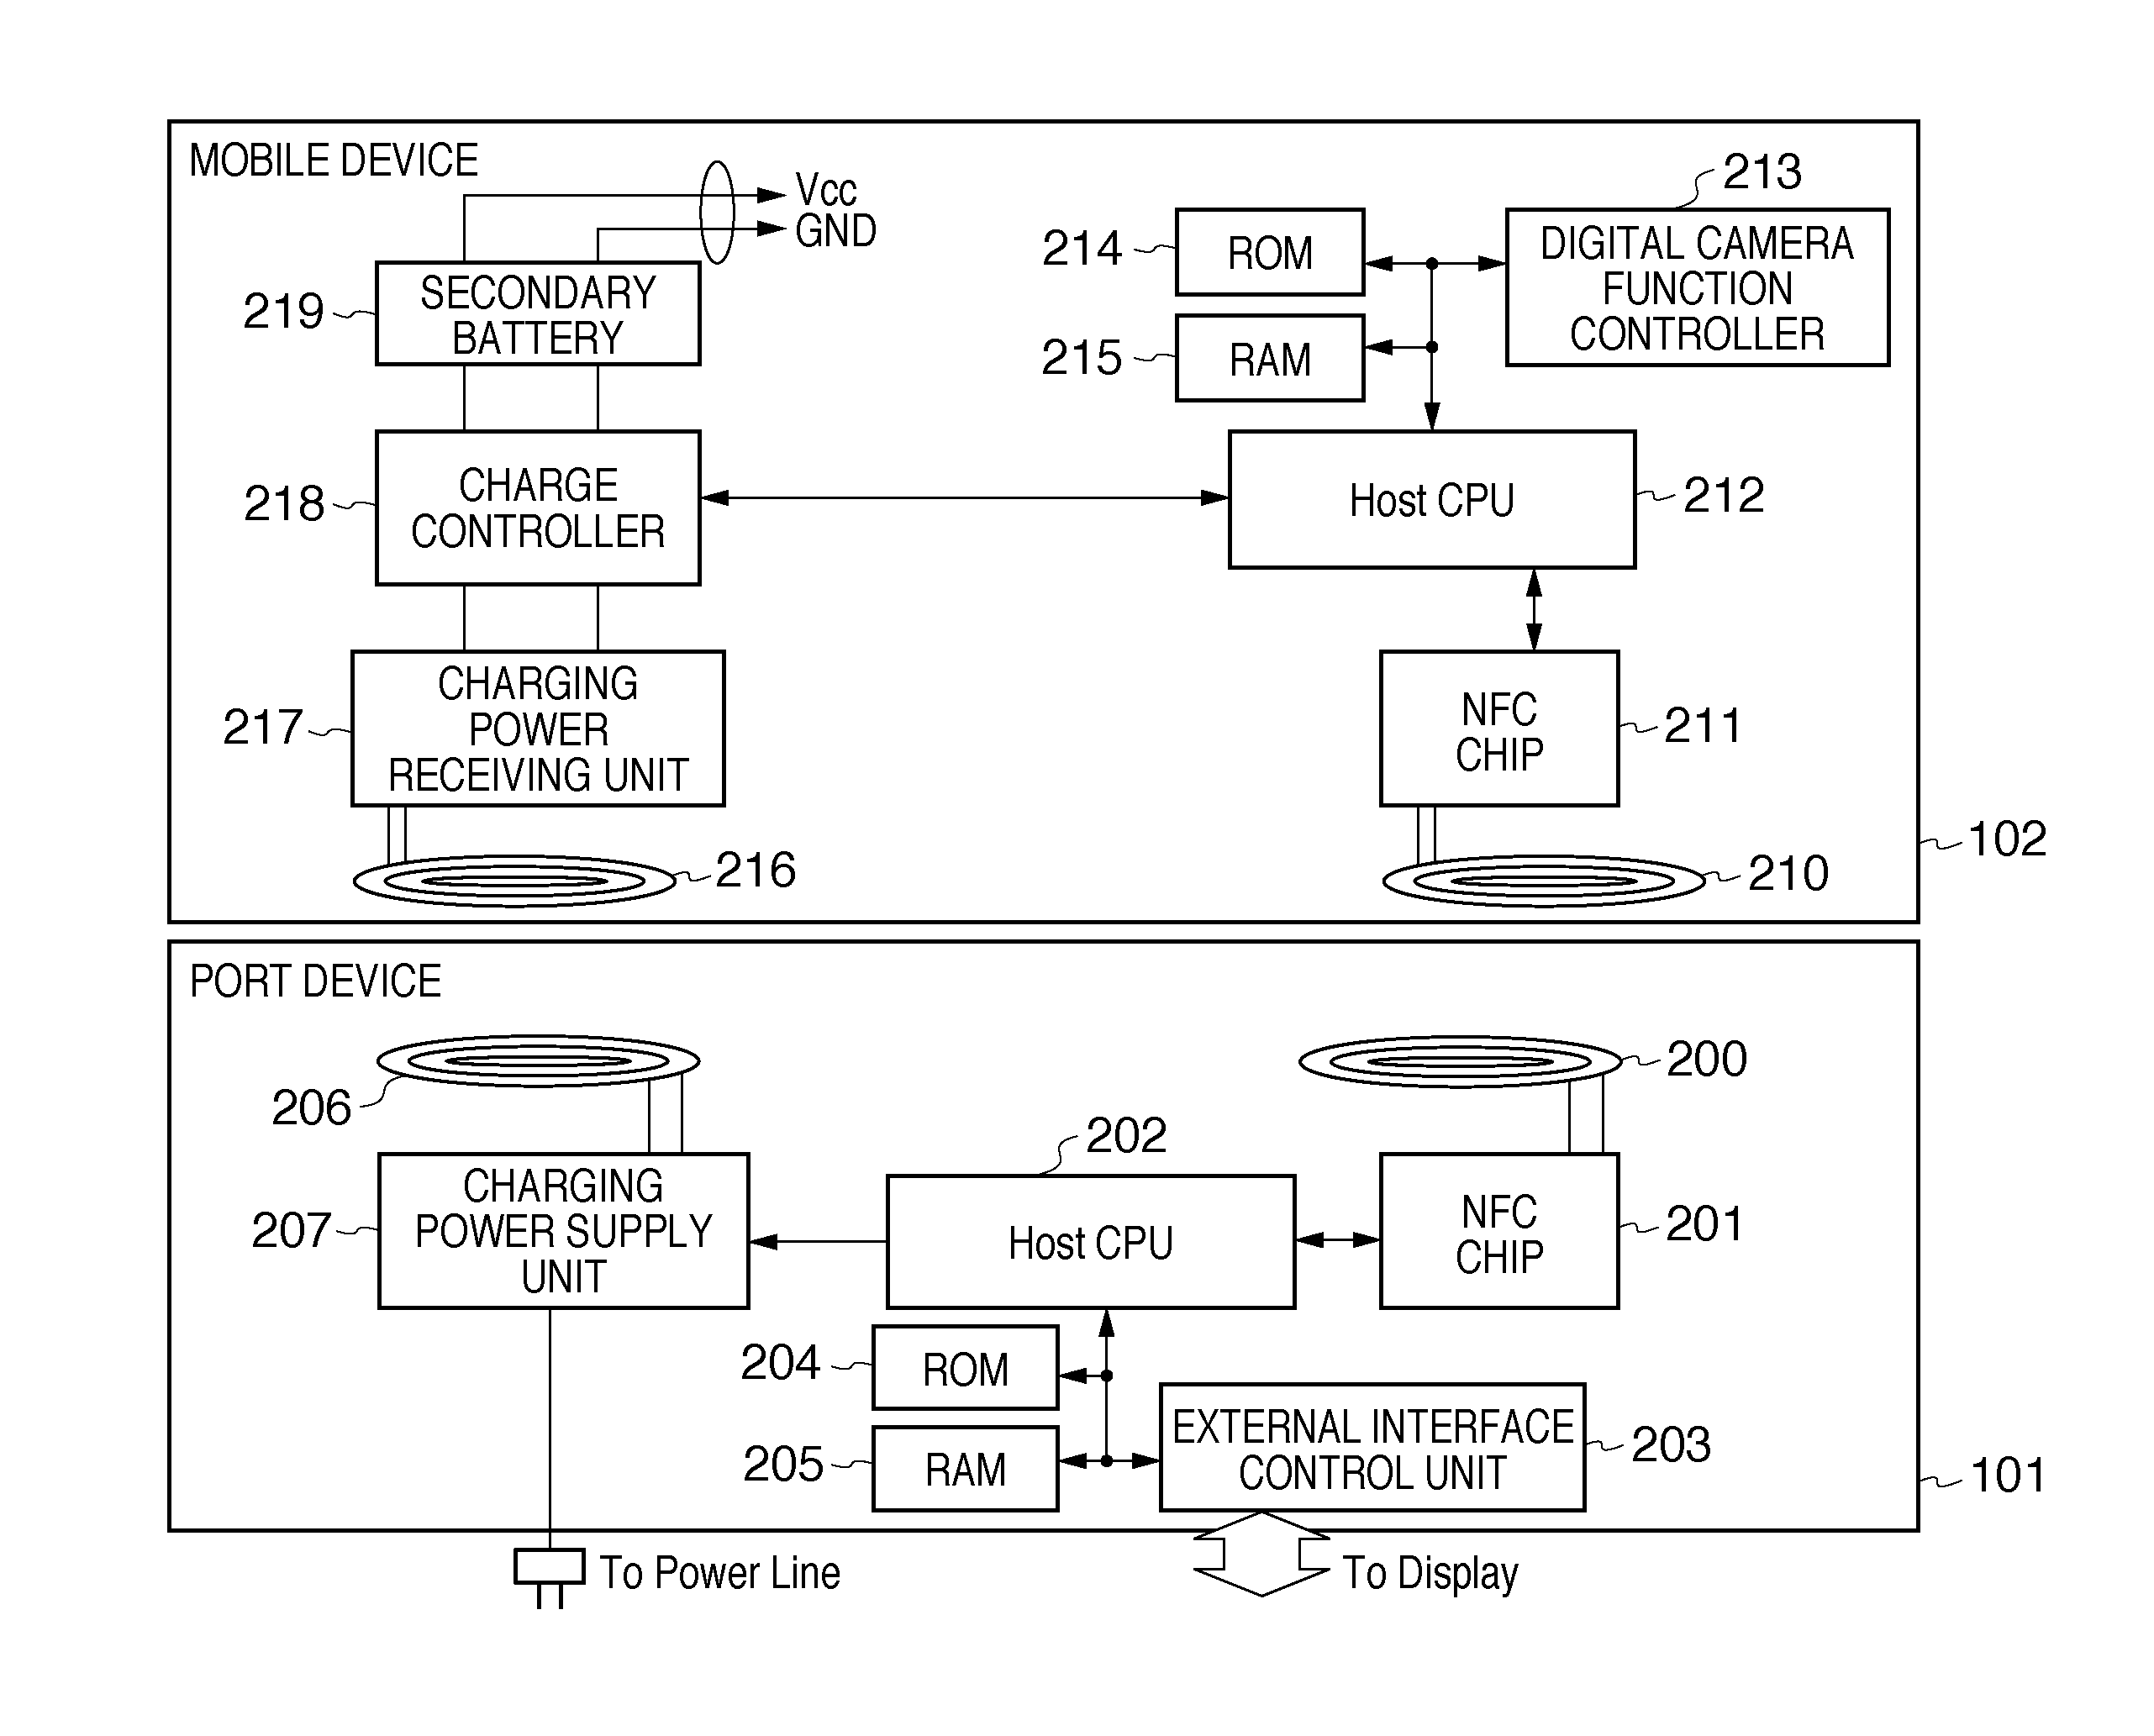 Communication apparatus and method for data communication and power transmission